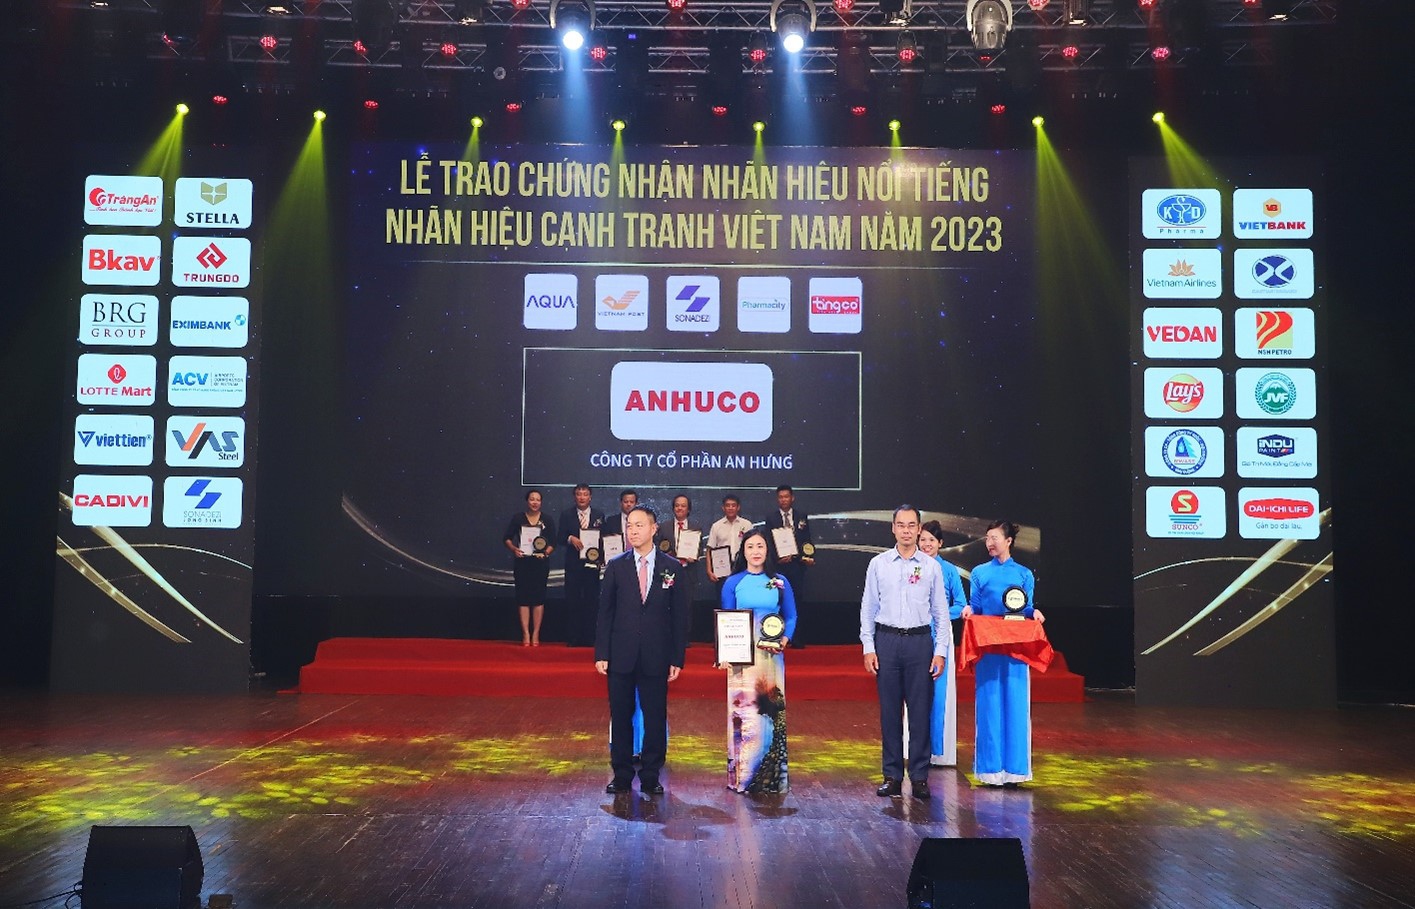 For the third consecutive year, ANHUCO has been honored as a famous Vietnamese brand